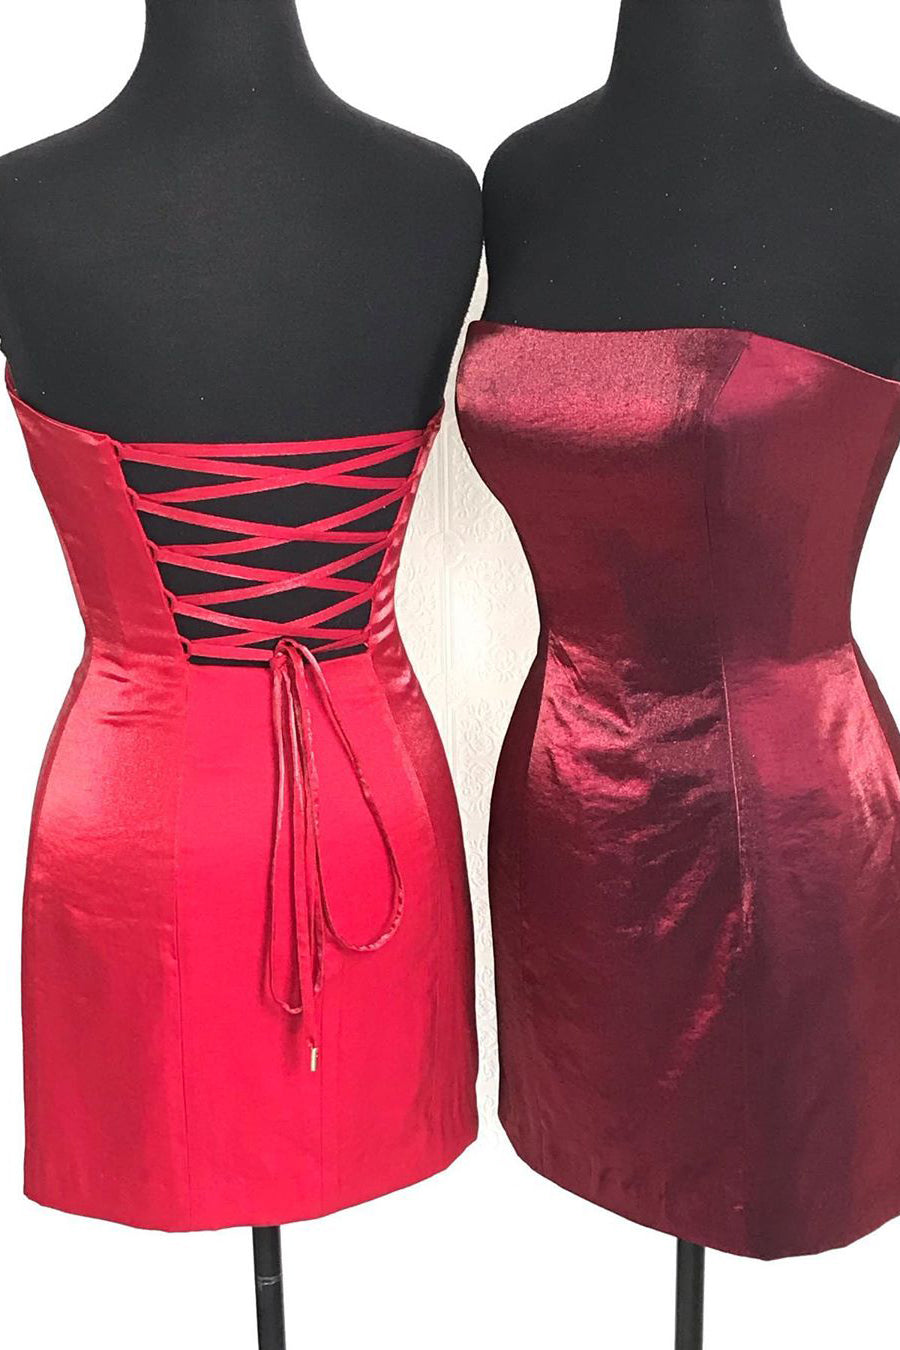 Strapless Sheath Lace-Up Burgundy Corset Homecoming Dress outfit, Prom Dresses Unique